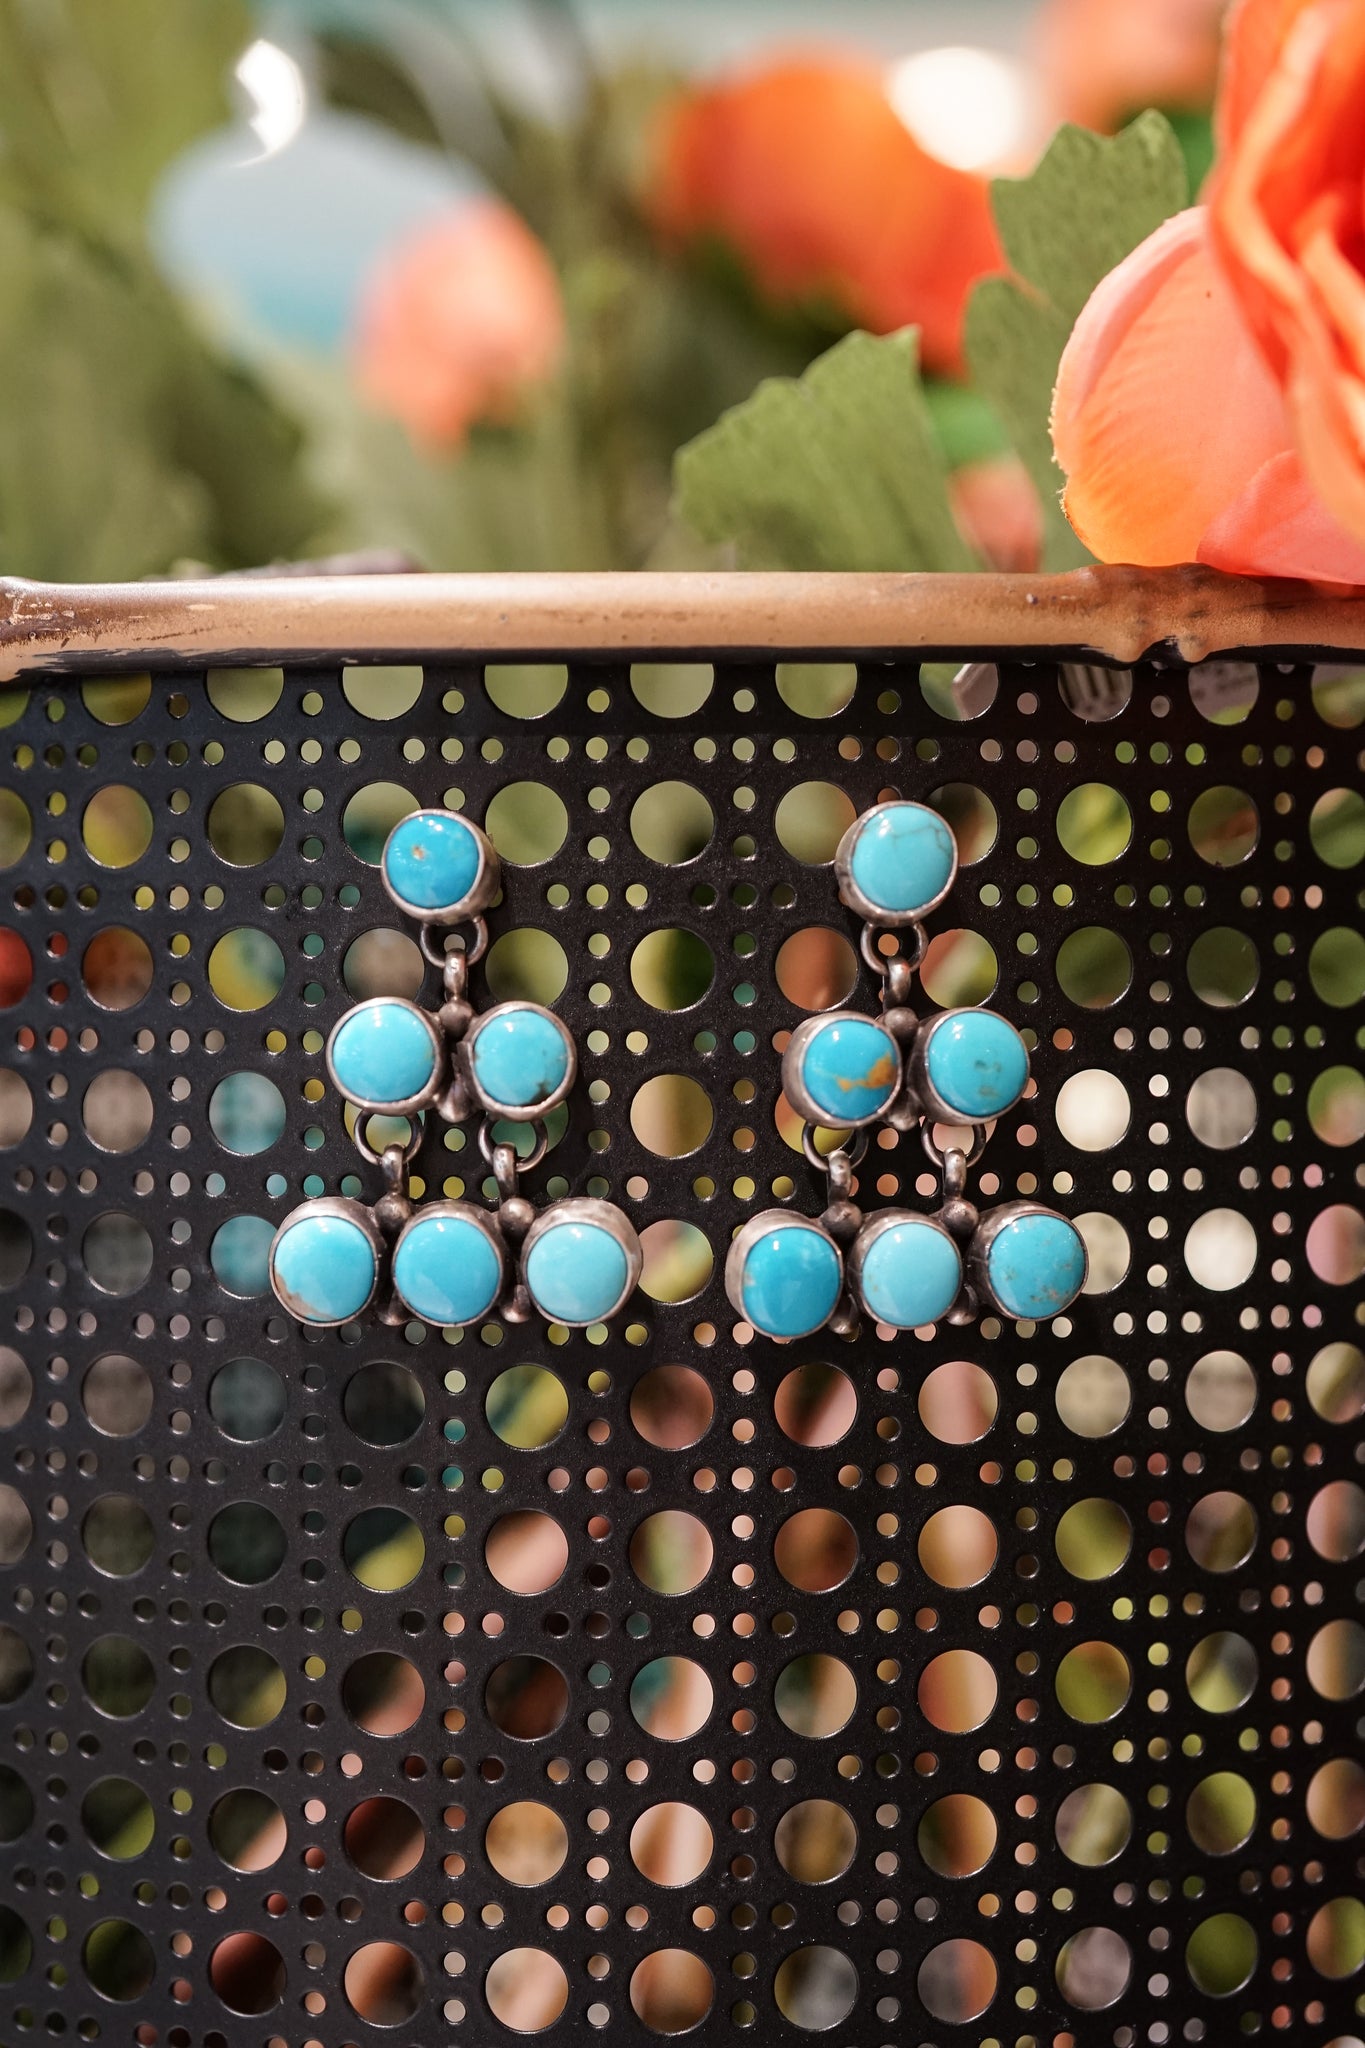 ITG The Blue Ridge Turquoise Statement Earring